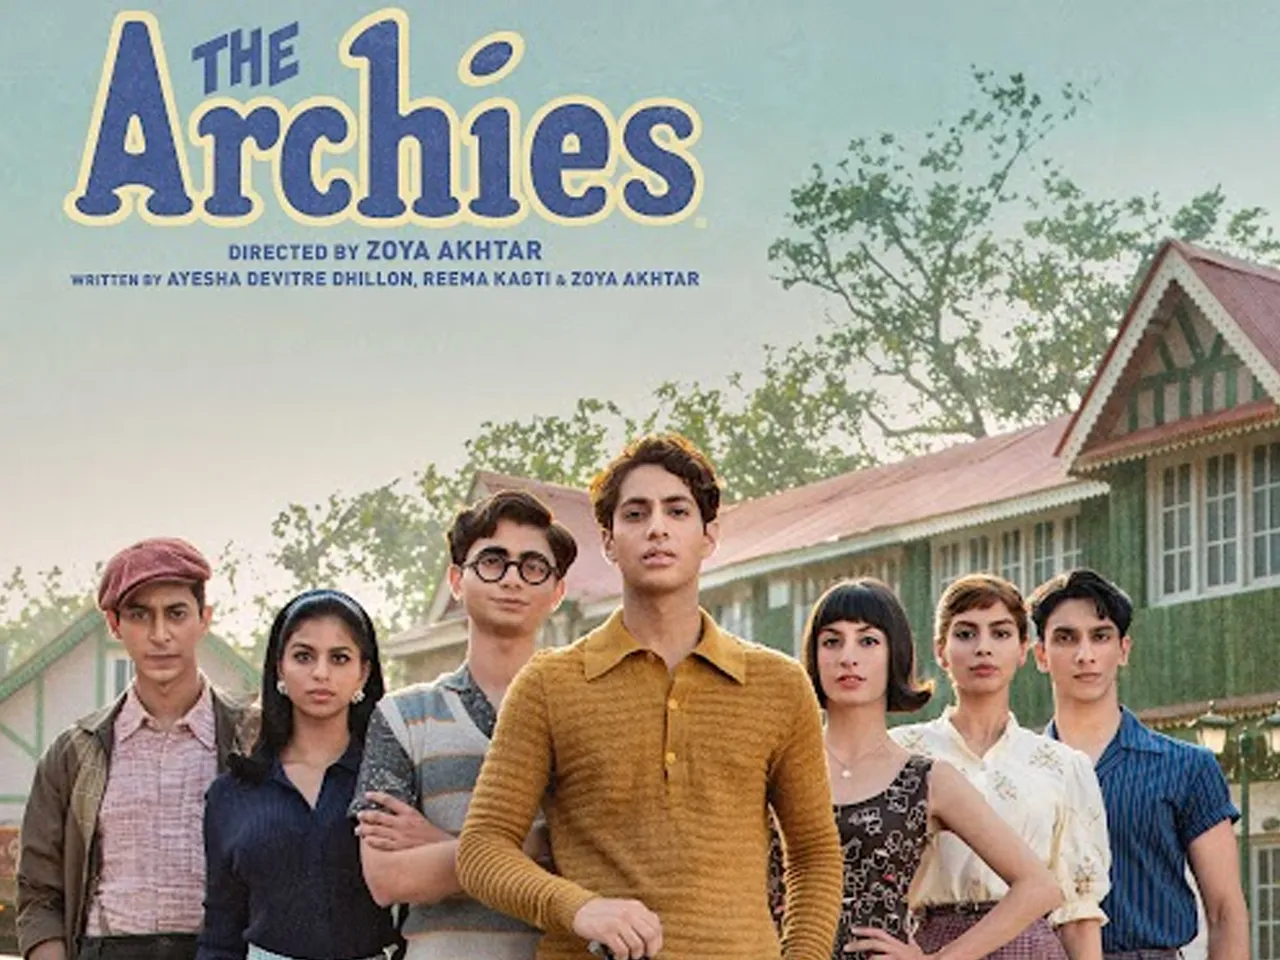 The Archies marketing